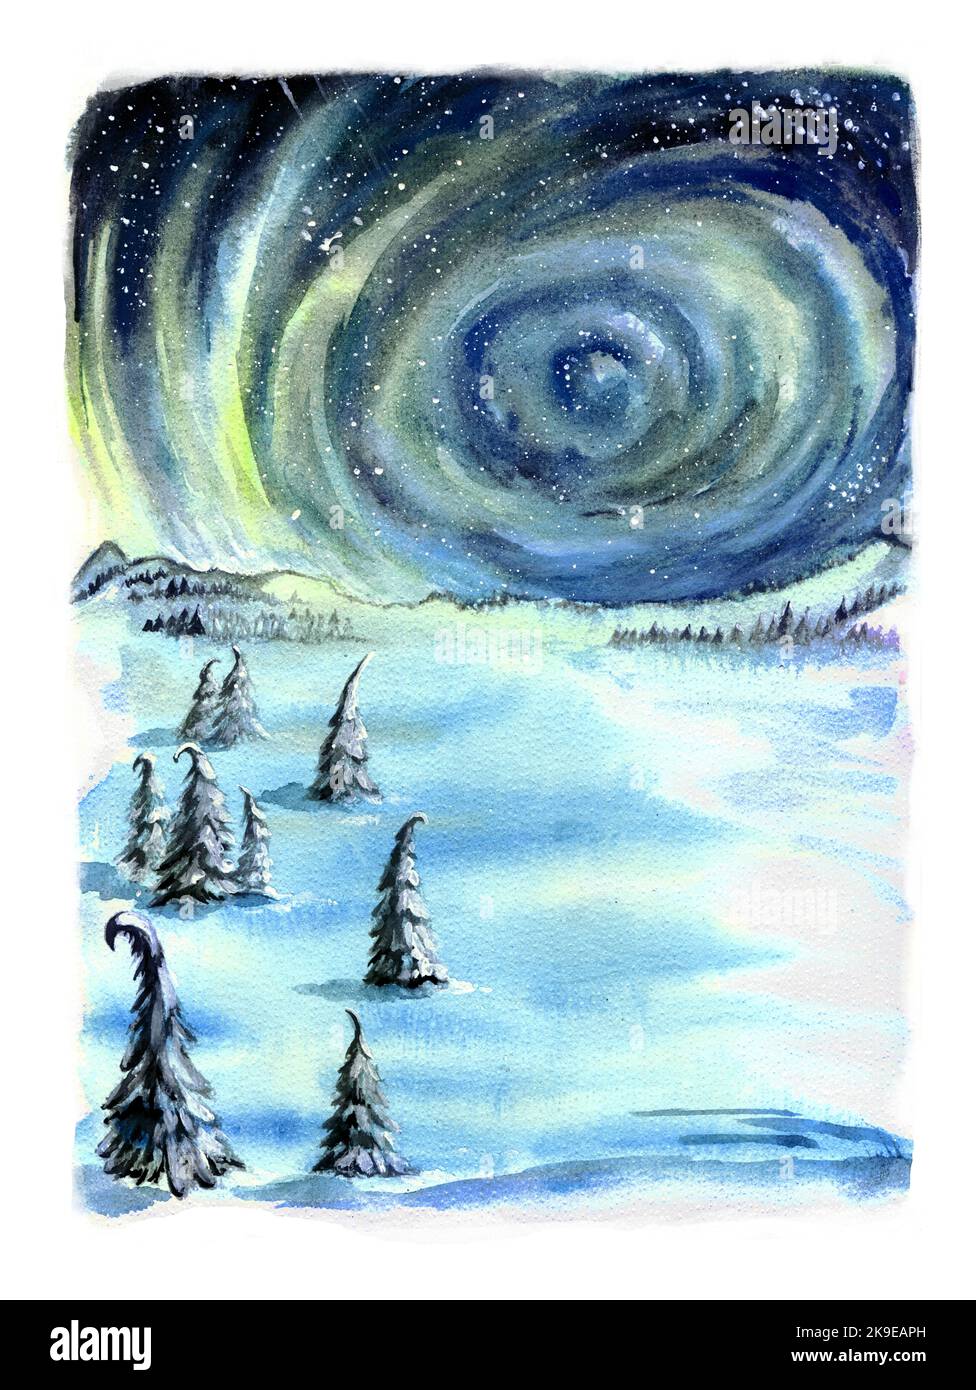 Northern lights in winter. Winter landscape with snow and firs. Watercolor landscape. Stock Photo